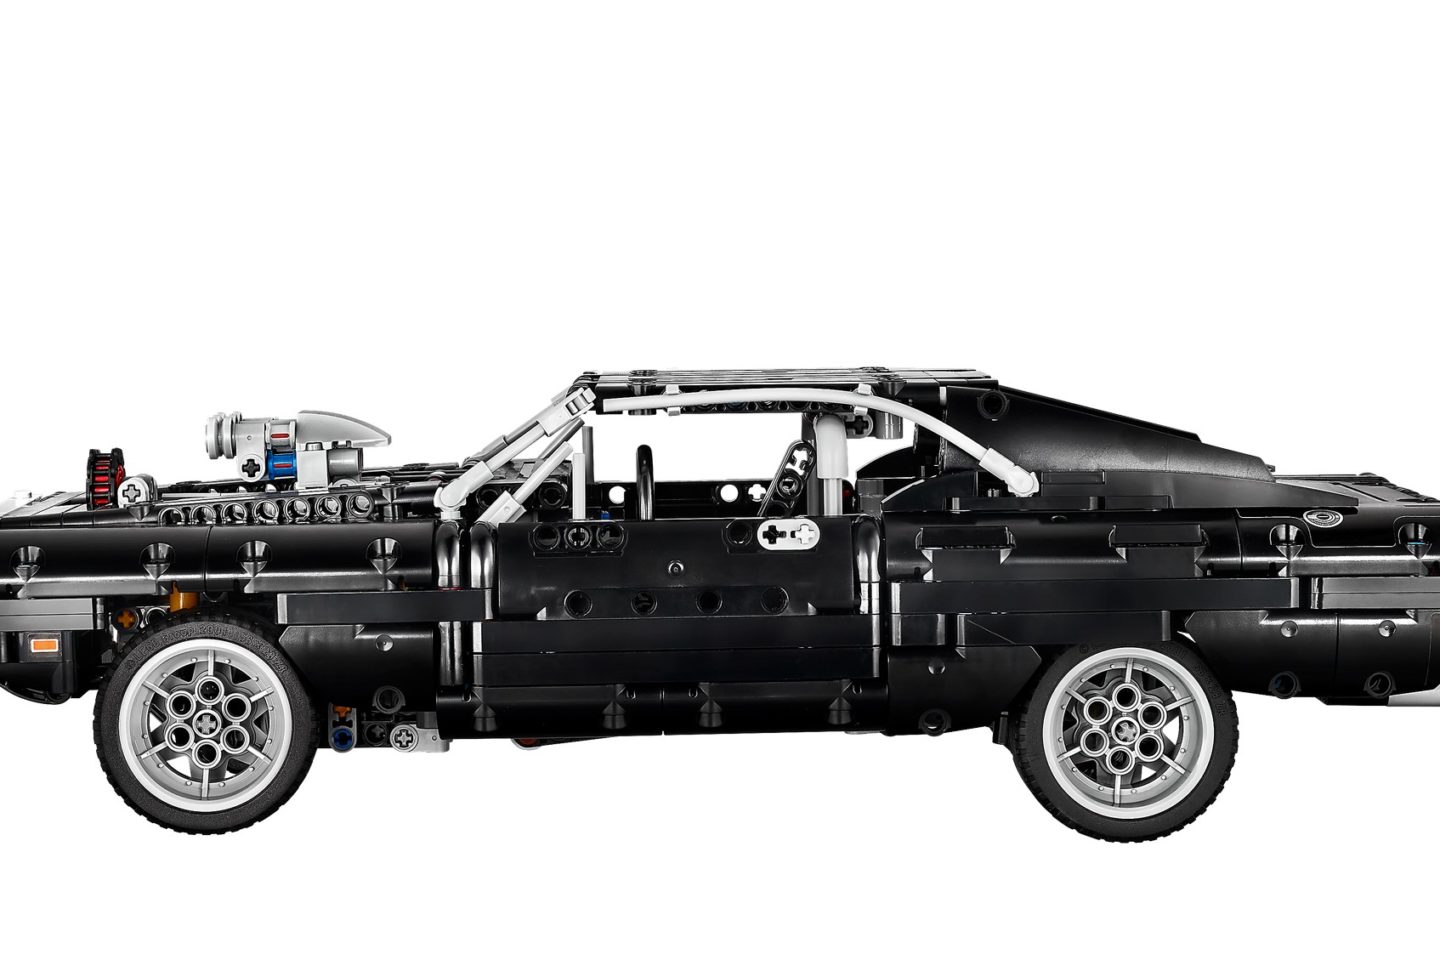 Dodge Charger Lego